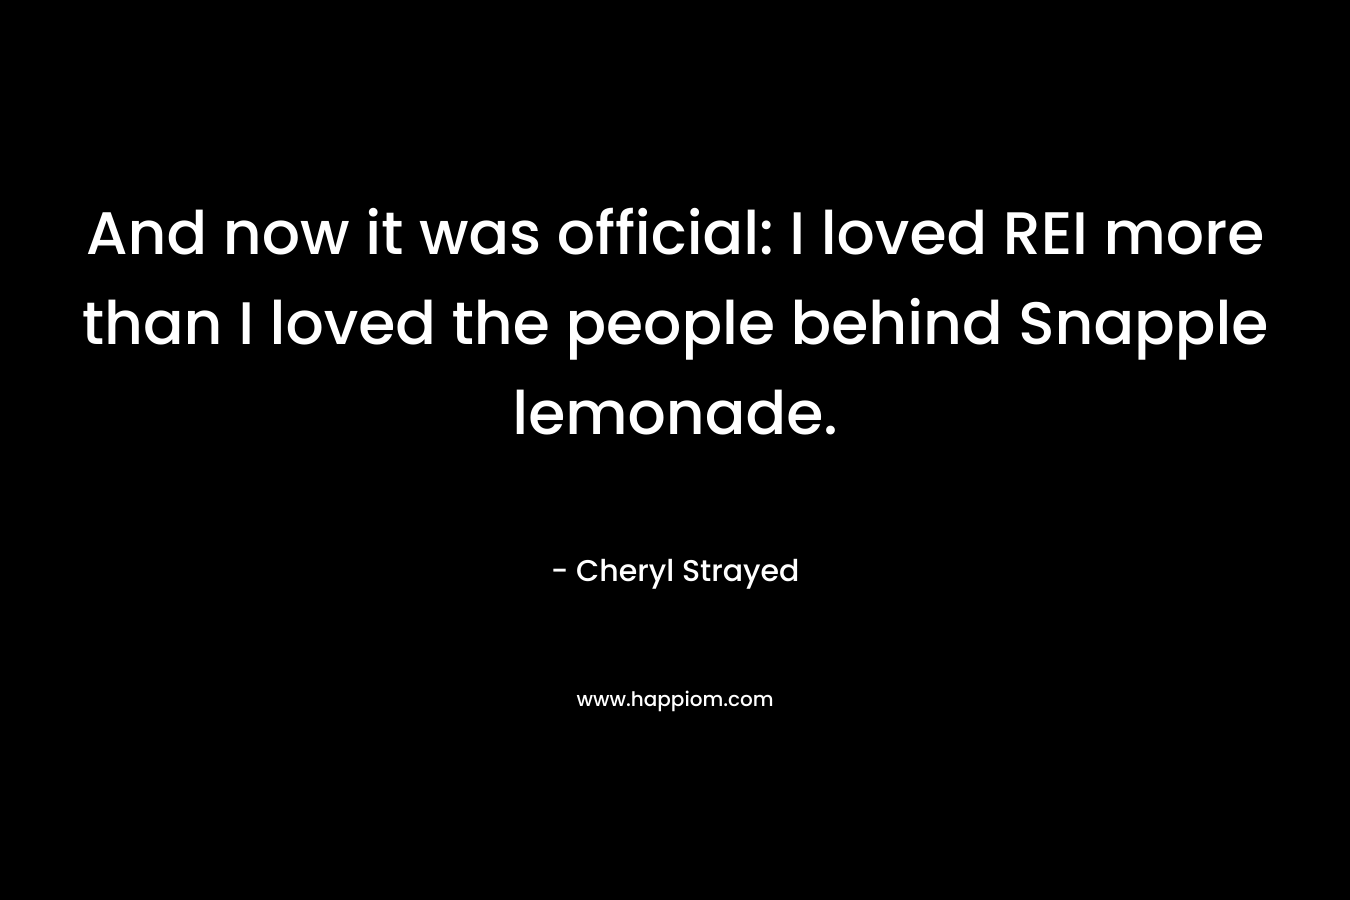 And now it was official: I loved REI more than I loved the people behind Snapple lemonade. – Cheryl Strayed